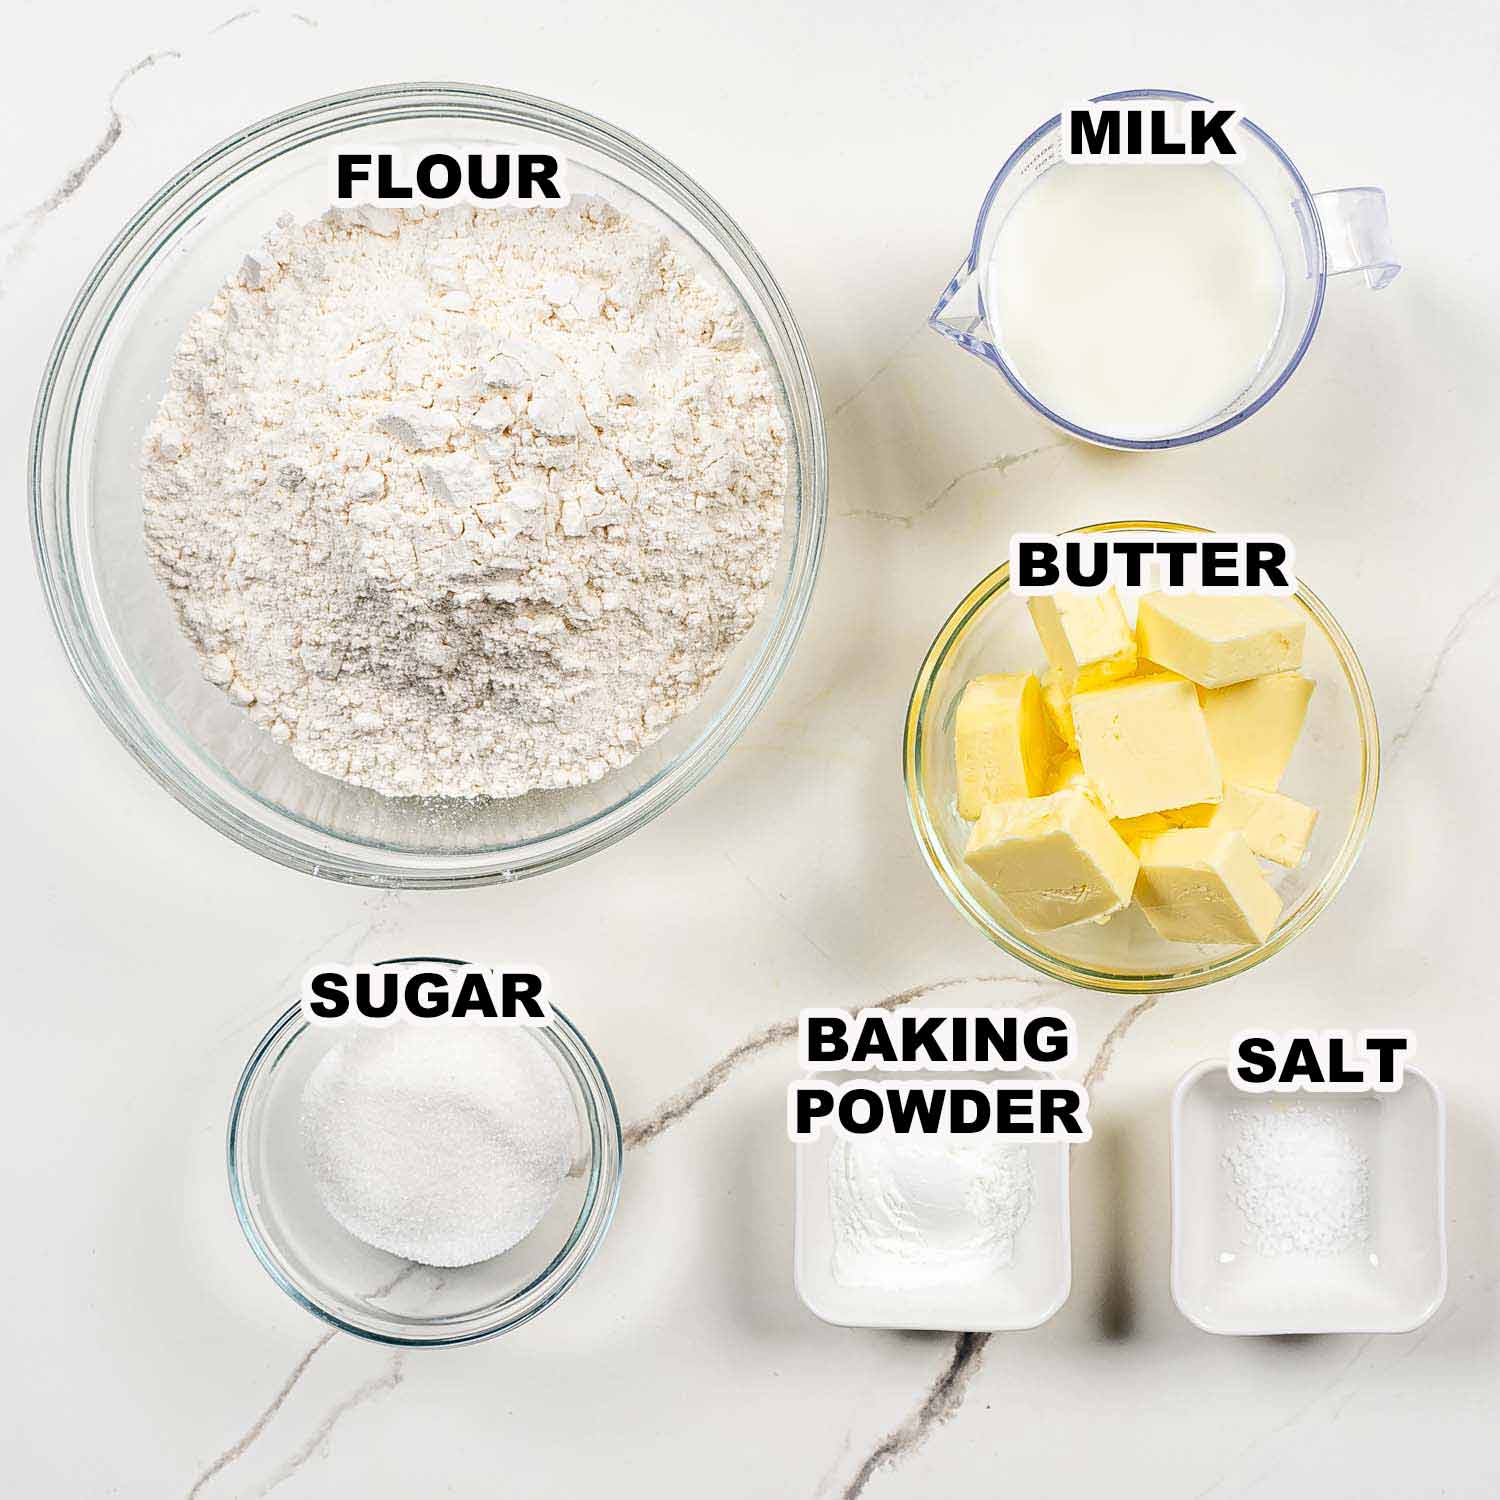 ingredients needed to make biscuits for strawberry shortcake.